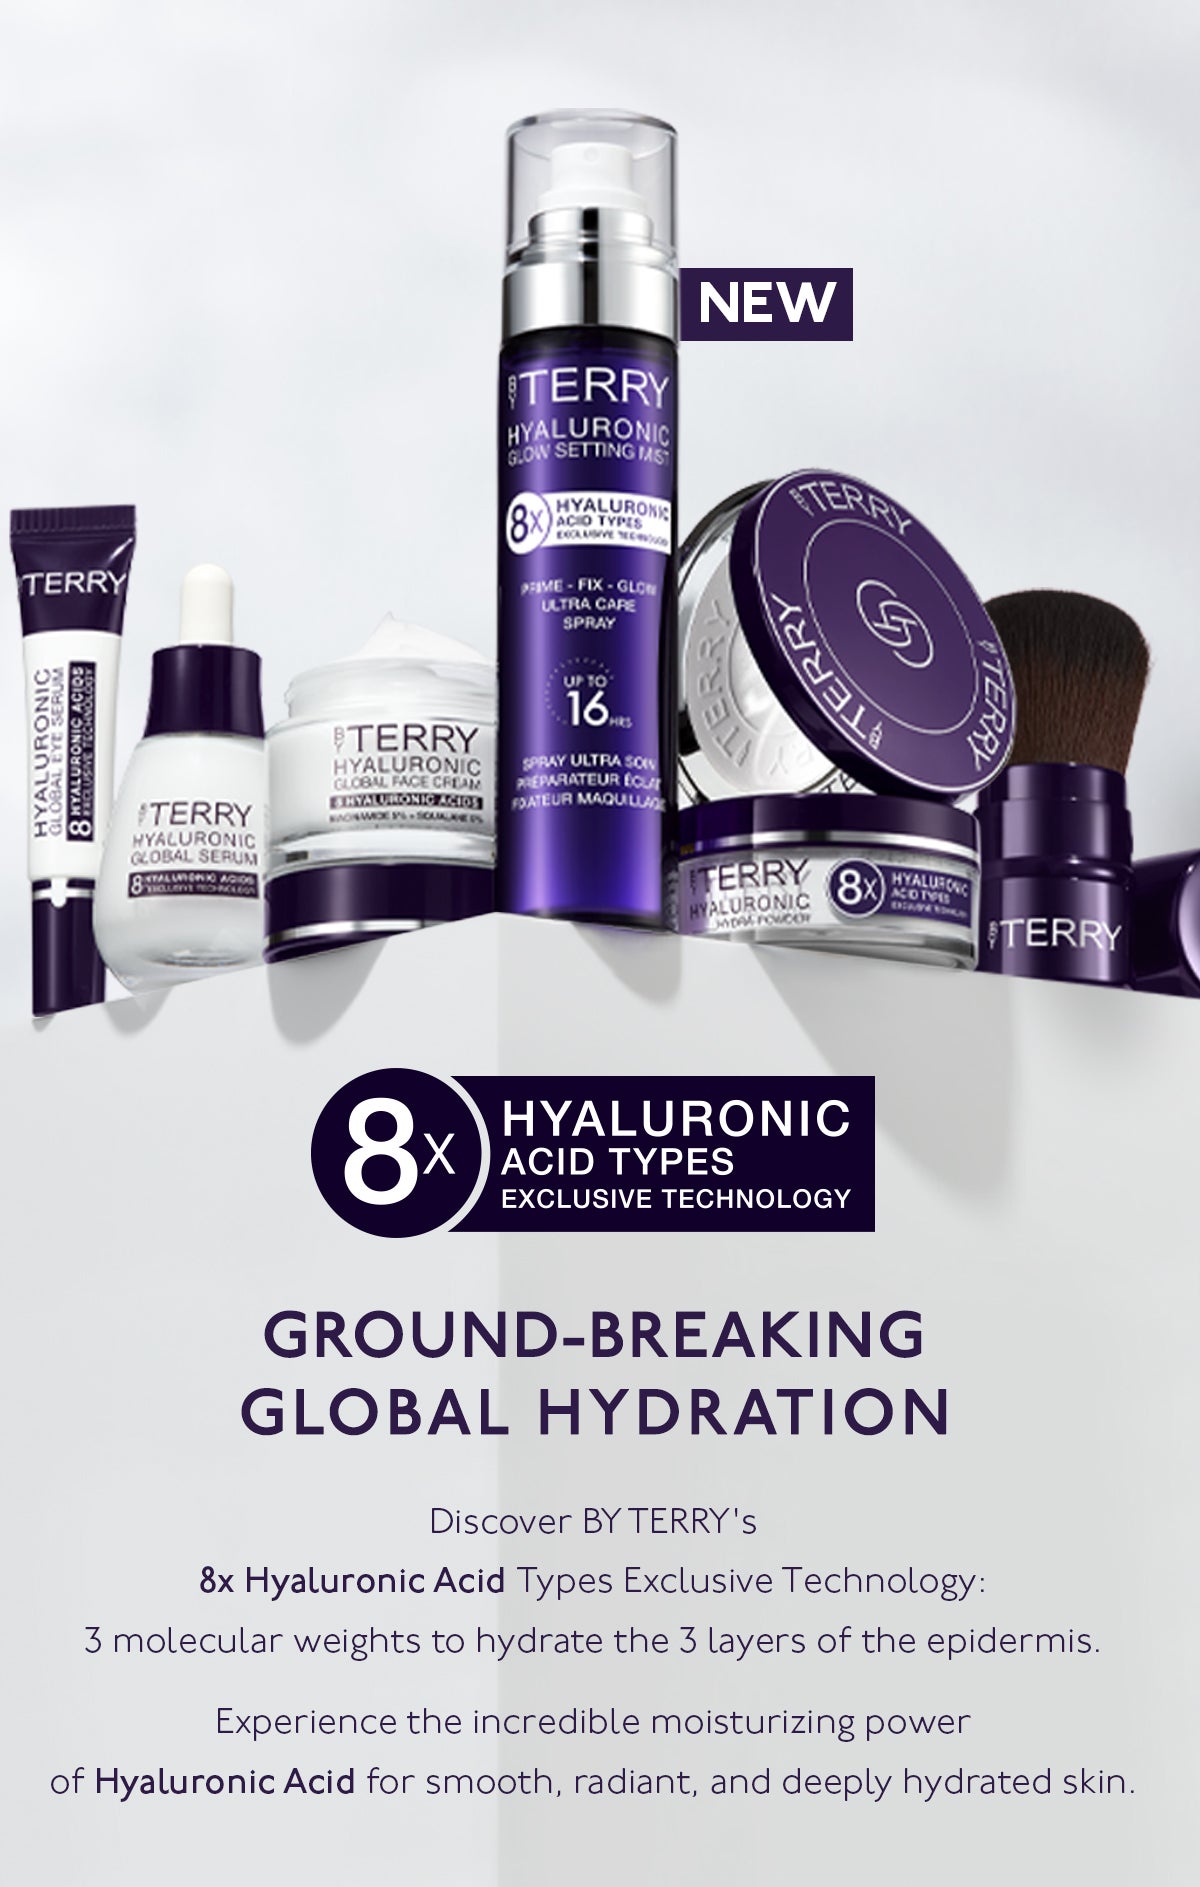 8x Hyaluronic Acid Types Exclusive Technology